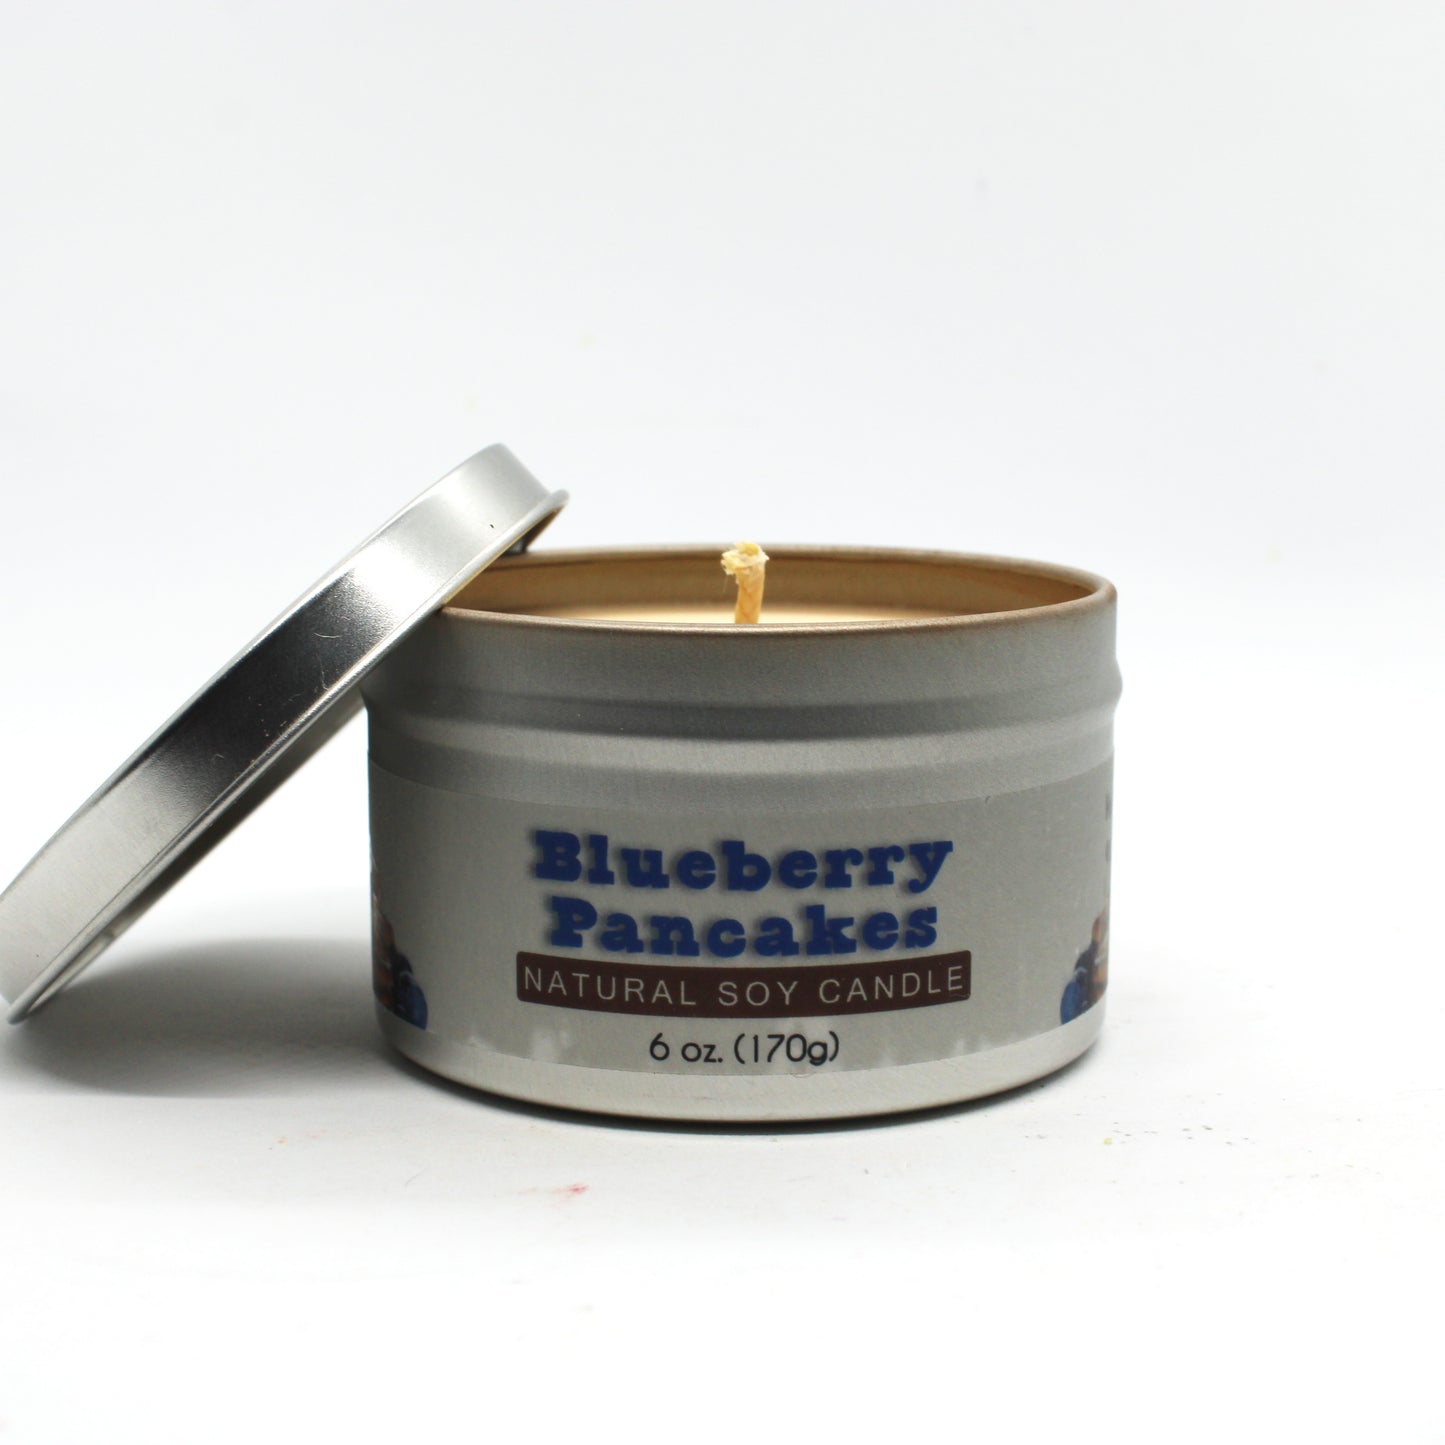 Blueberry Pancakes Candle